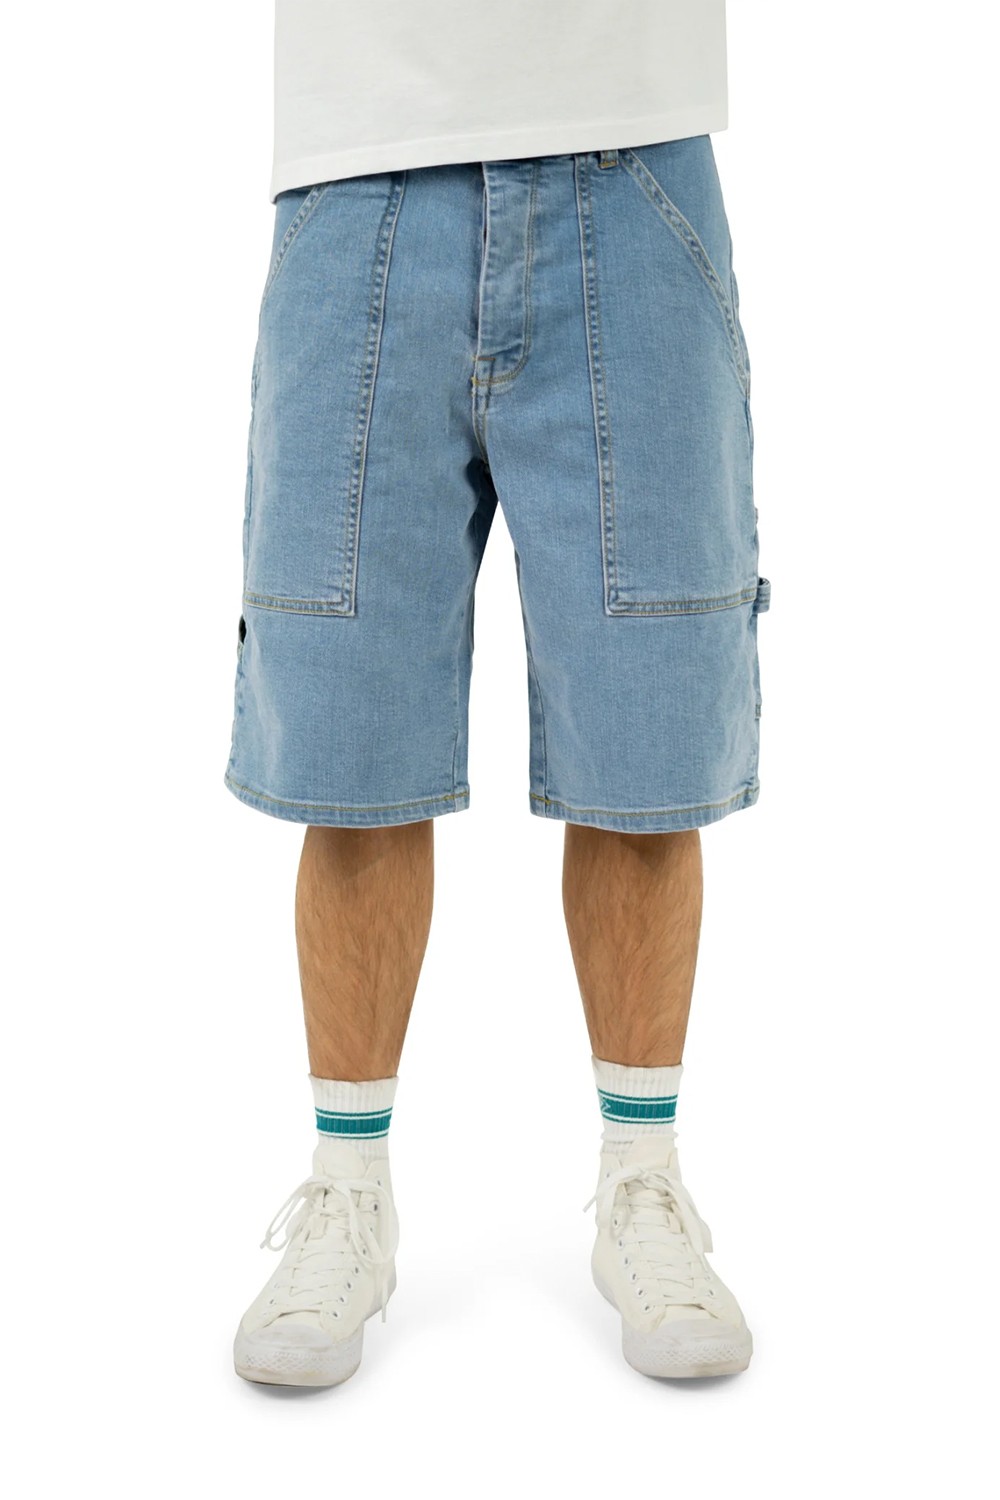 HOMEBOY X-tra Work Shorts Moon (HB-BS-10)